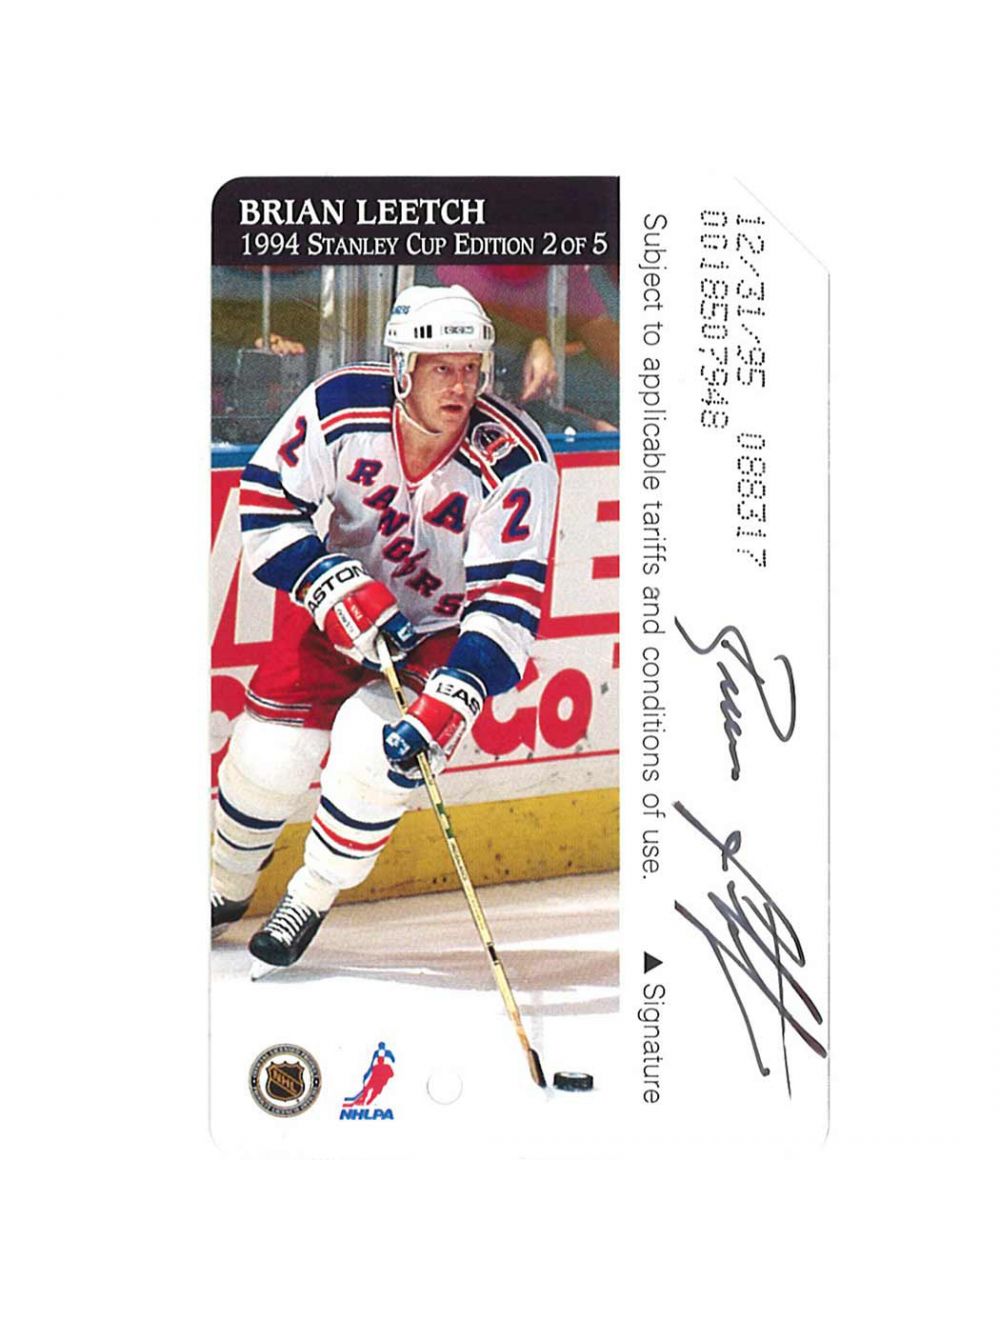 Brian Leetch autographed Jersey (New York Rangers)